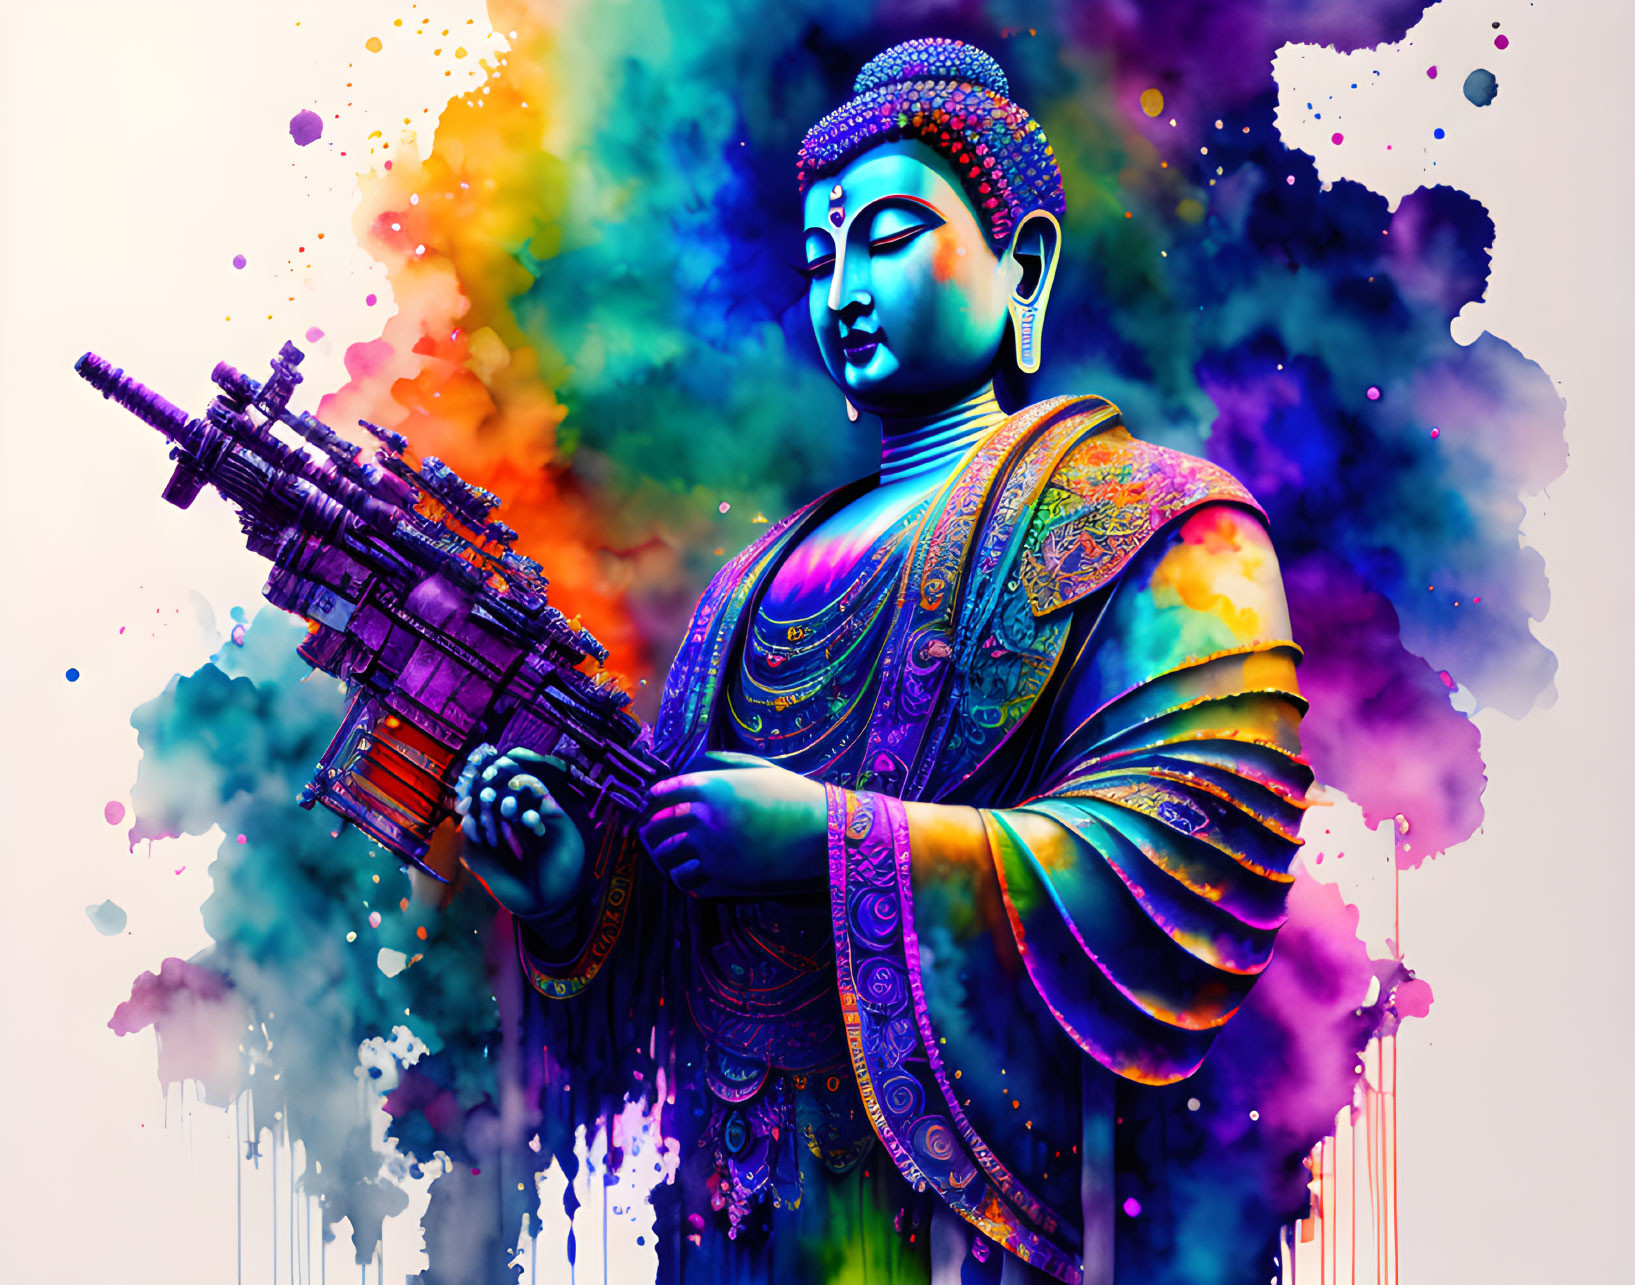 Colorful Buddha Figure Illustration with Gradient Effect and Ink Splatters